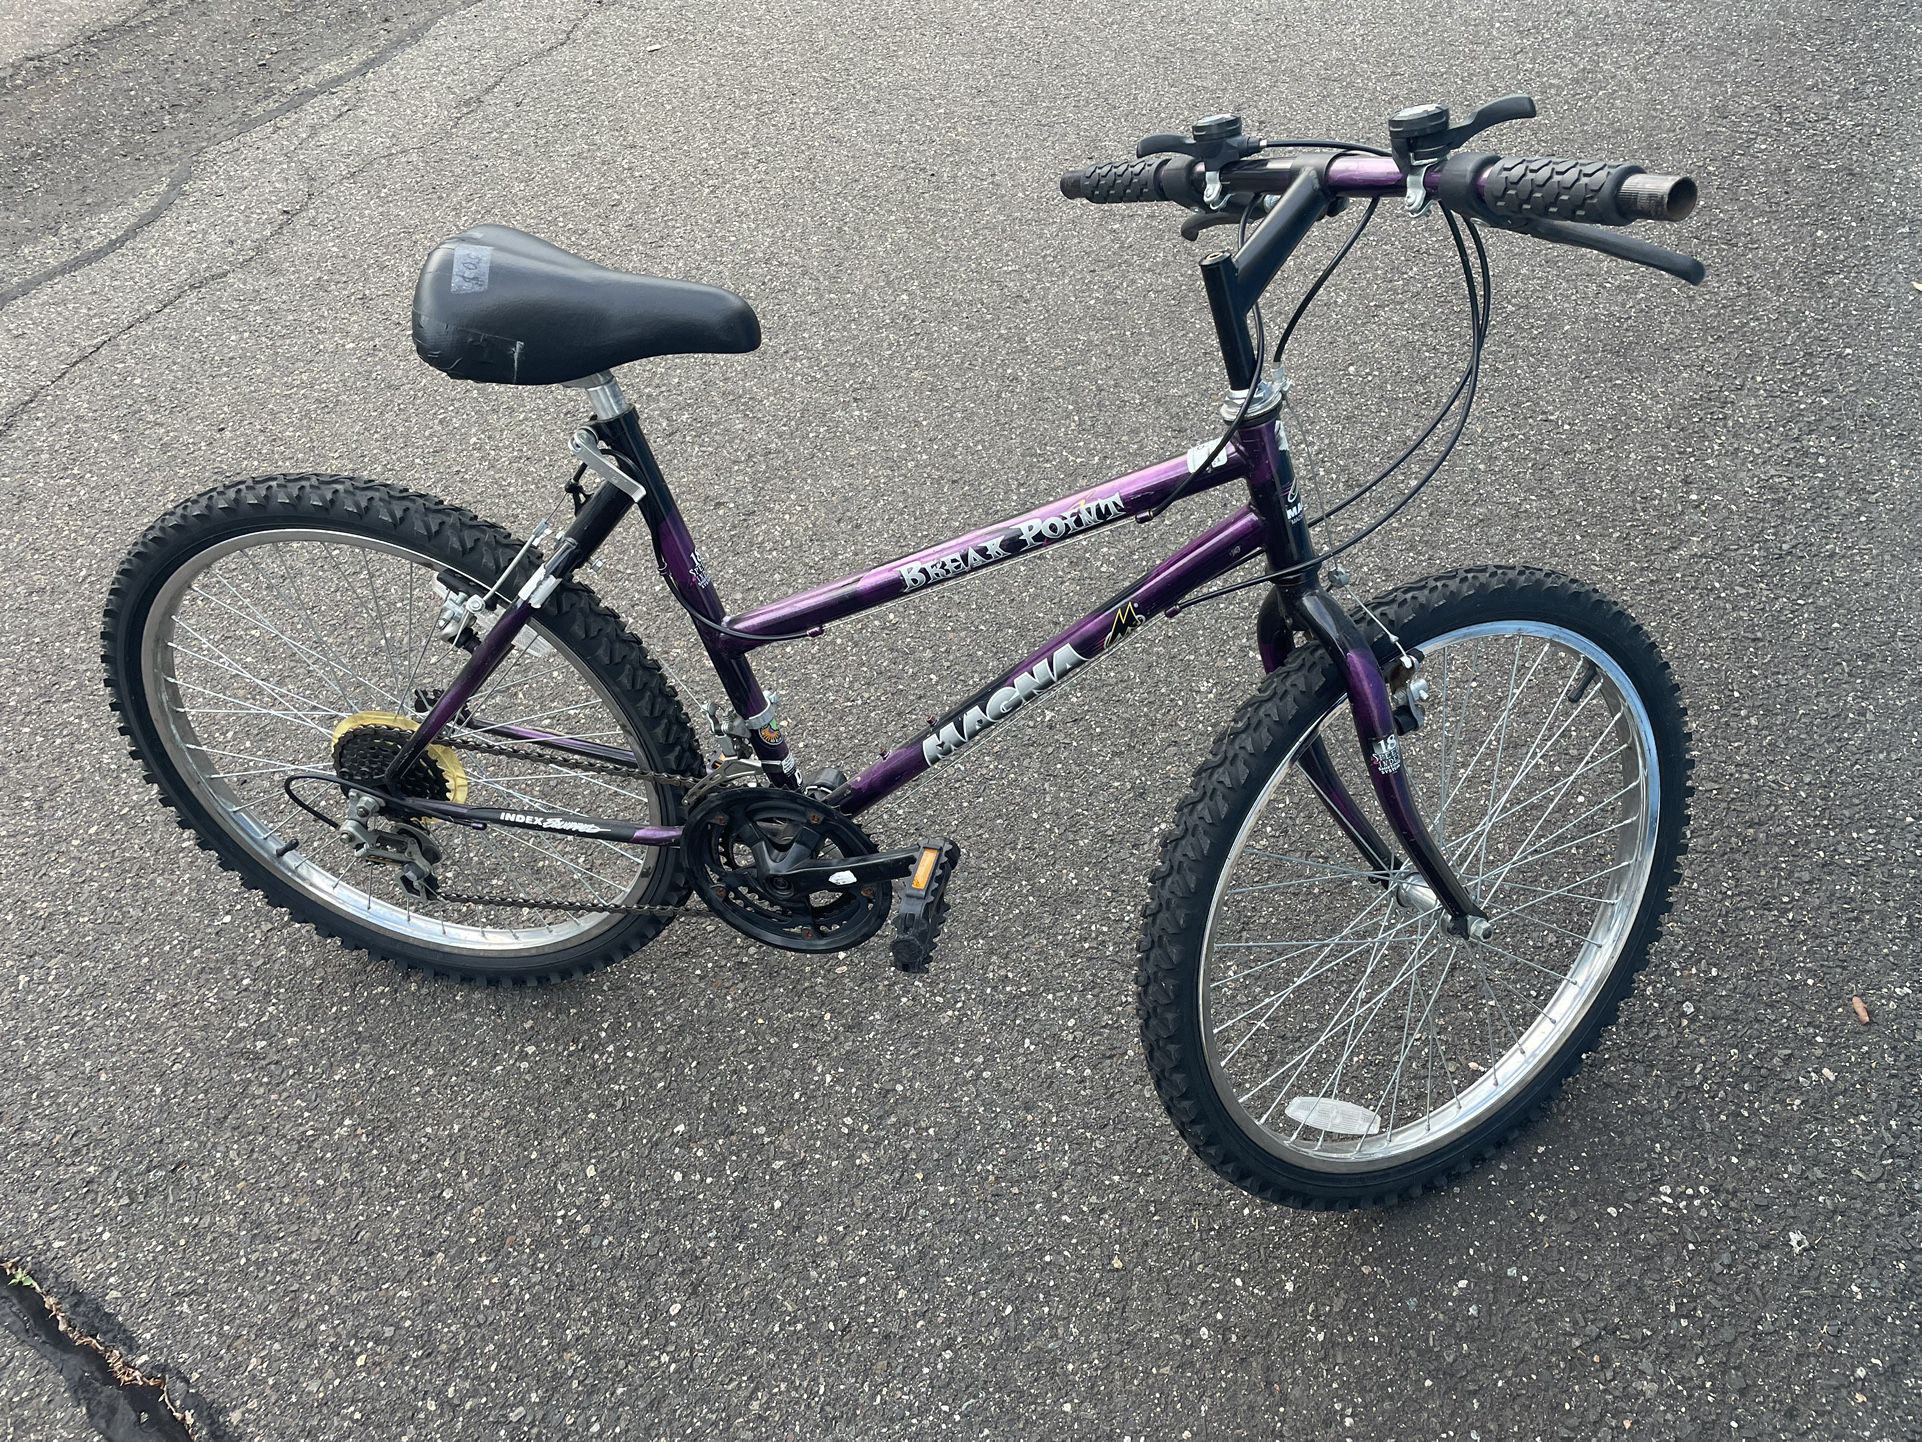 24” Girls Bike Great Condition Like New Tires 